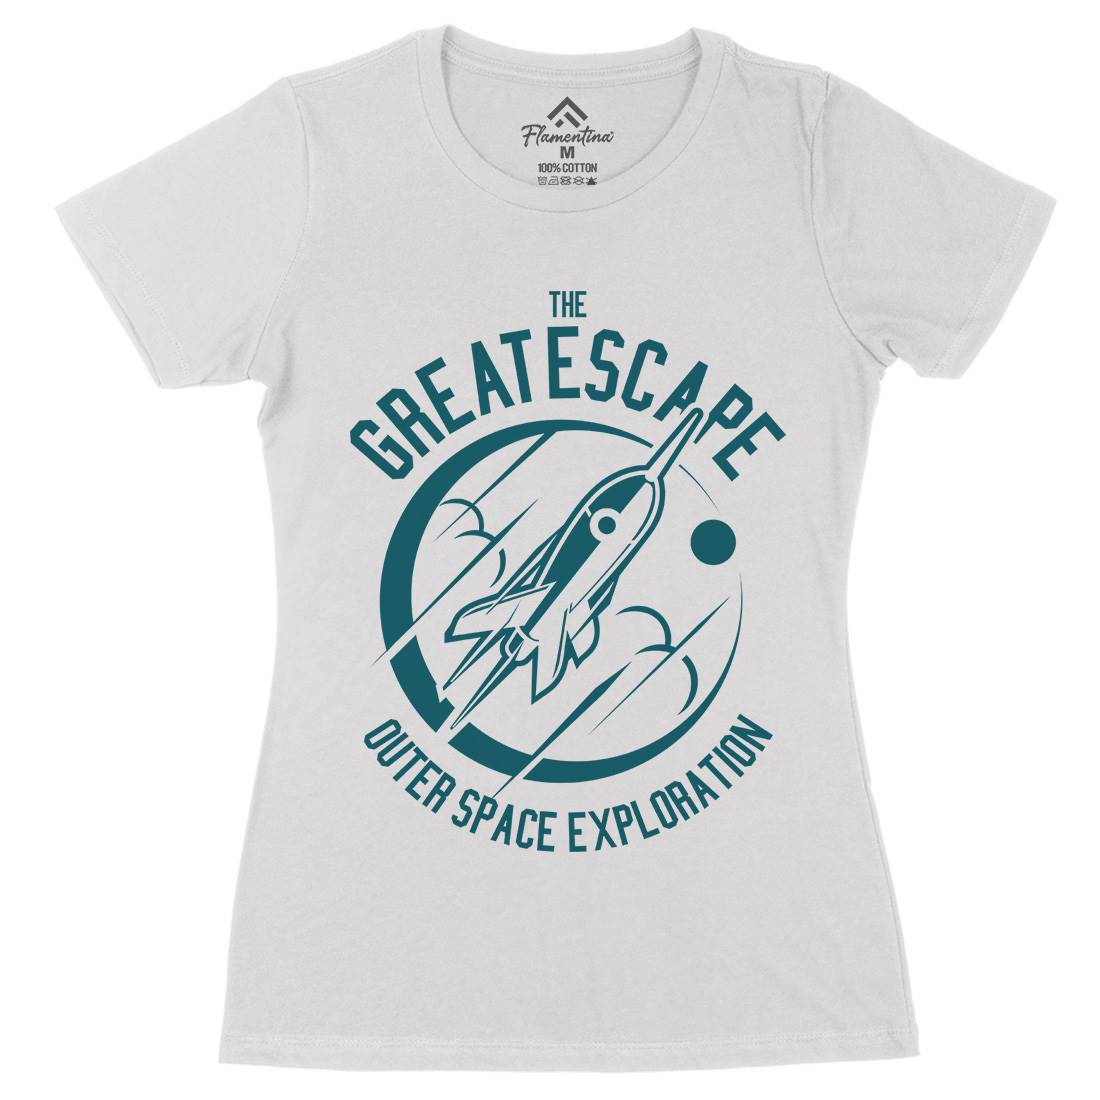 Great Escape Womens Organic Crew Neck T-Shirt Space A292